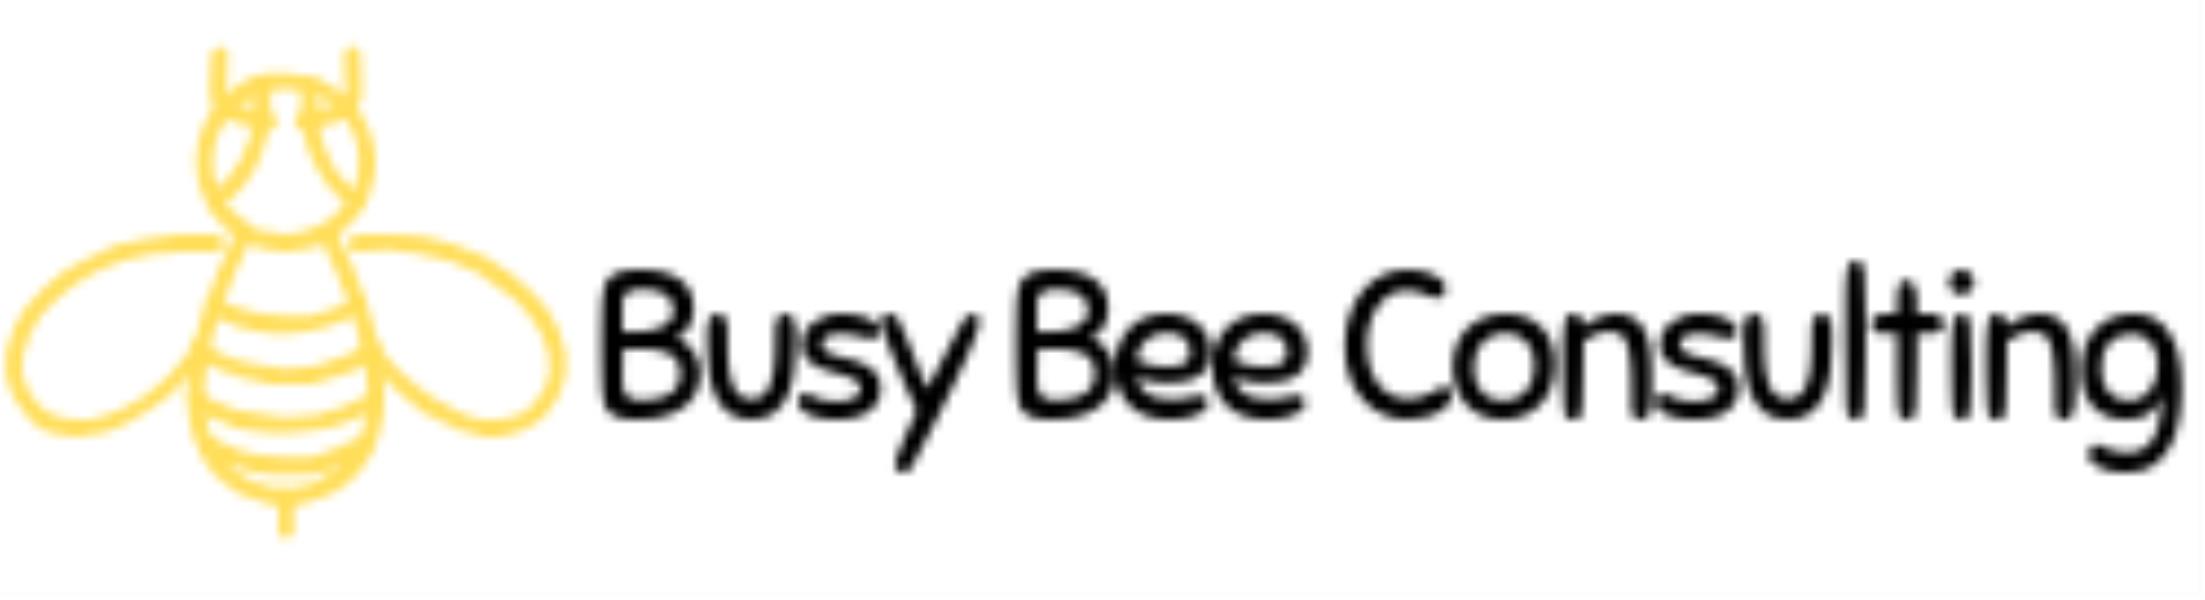 cropped-Copy-of-Copy-of-Copy-of-Copy-of-Copy-of-Busy-Bee